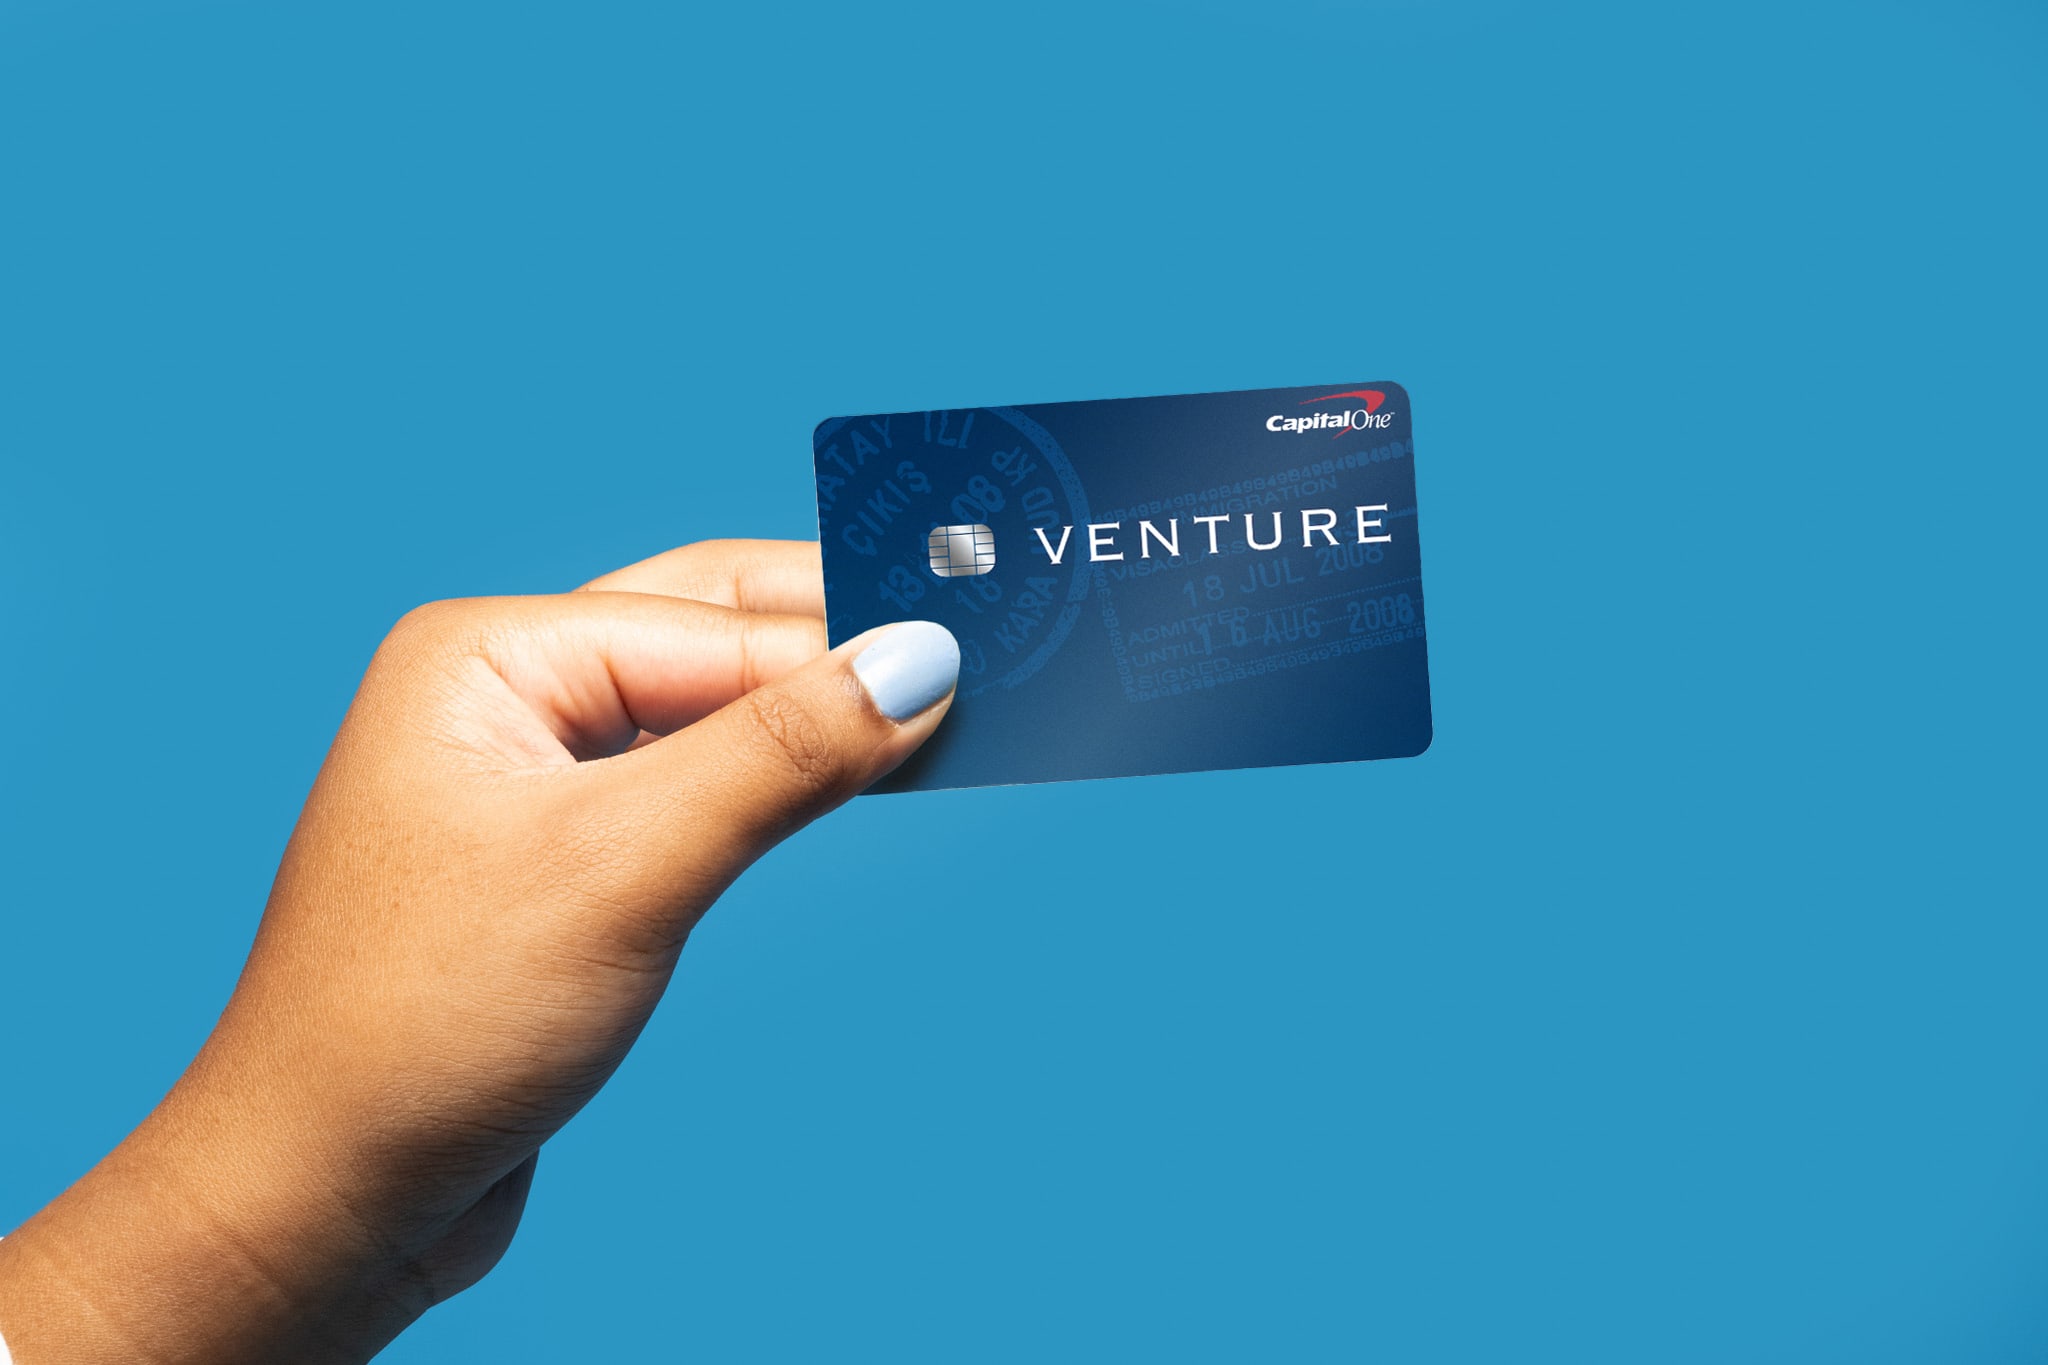 What Credit Score Do You Need For Capital One Venture